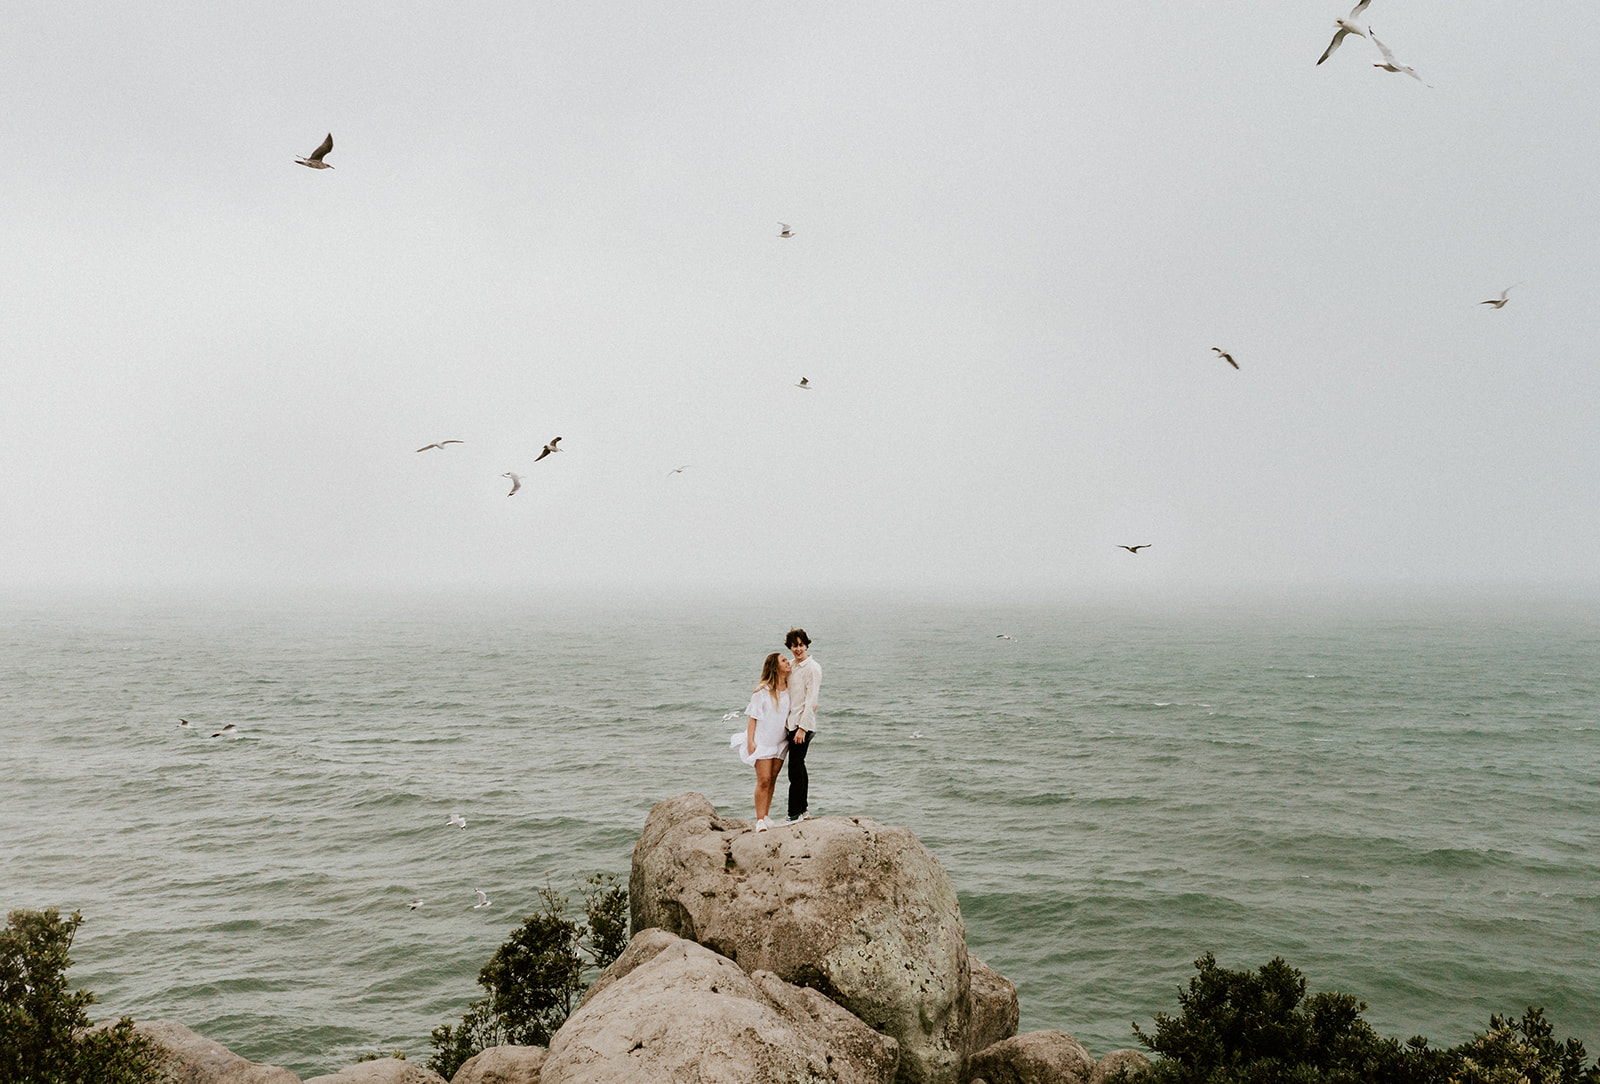 couple on top of rocks surrounded by flying birds with the ocean in the background